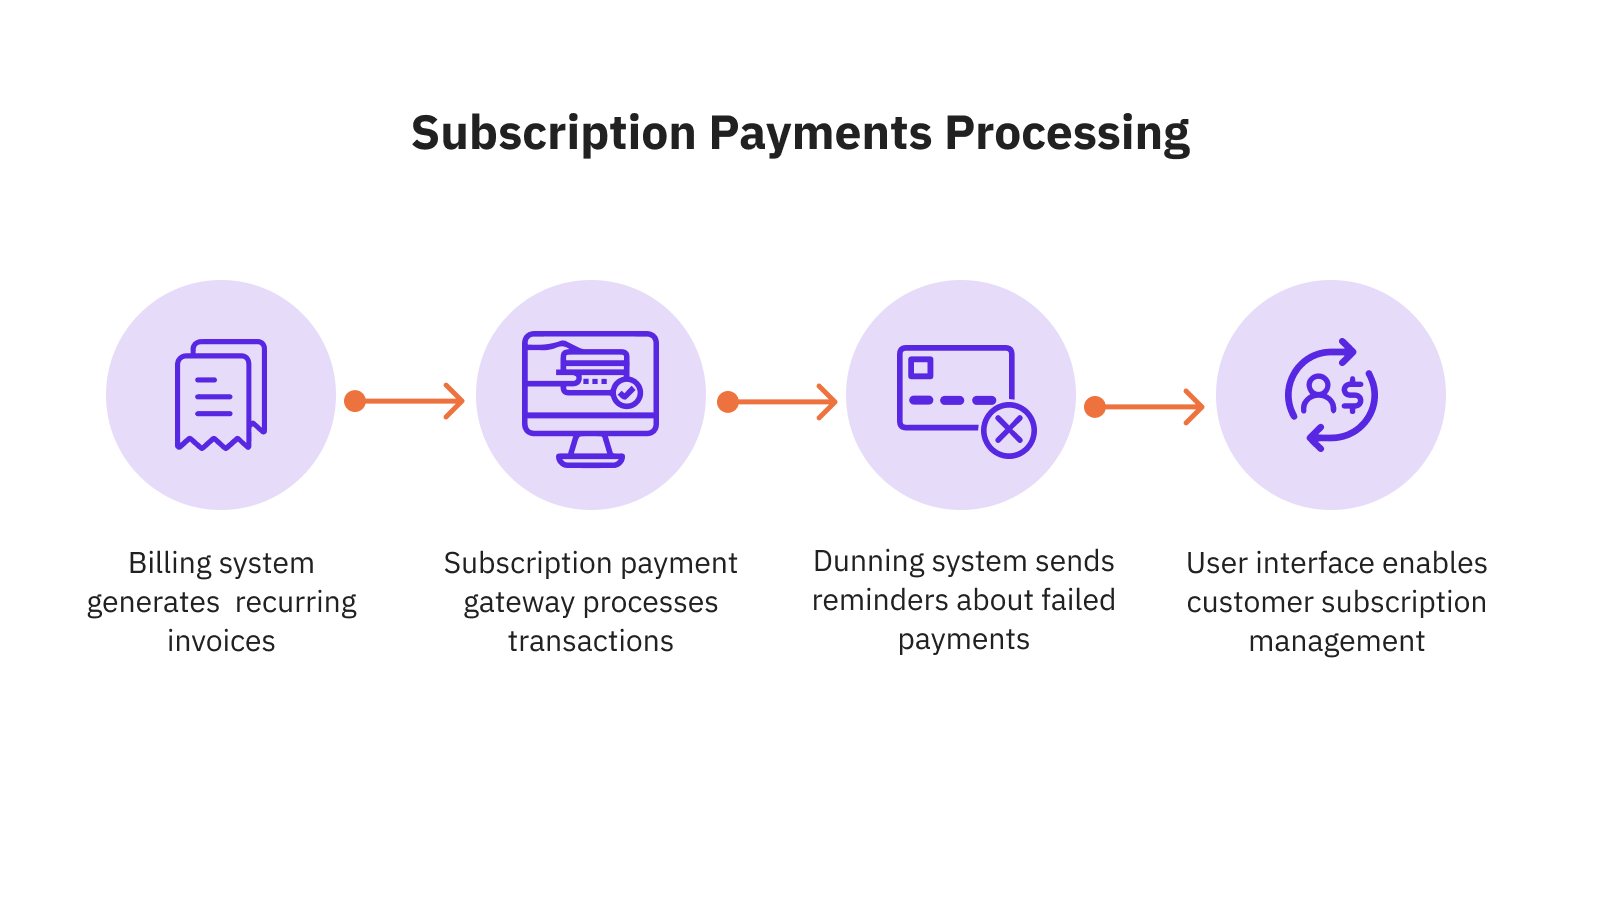 The systems involved in subscription payment processing